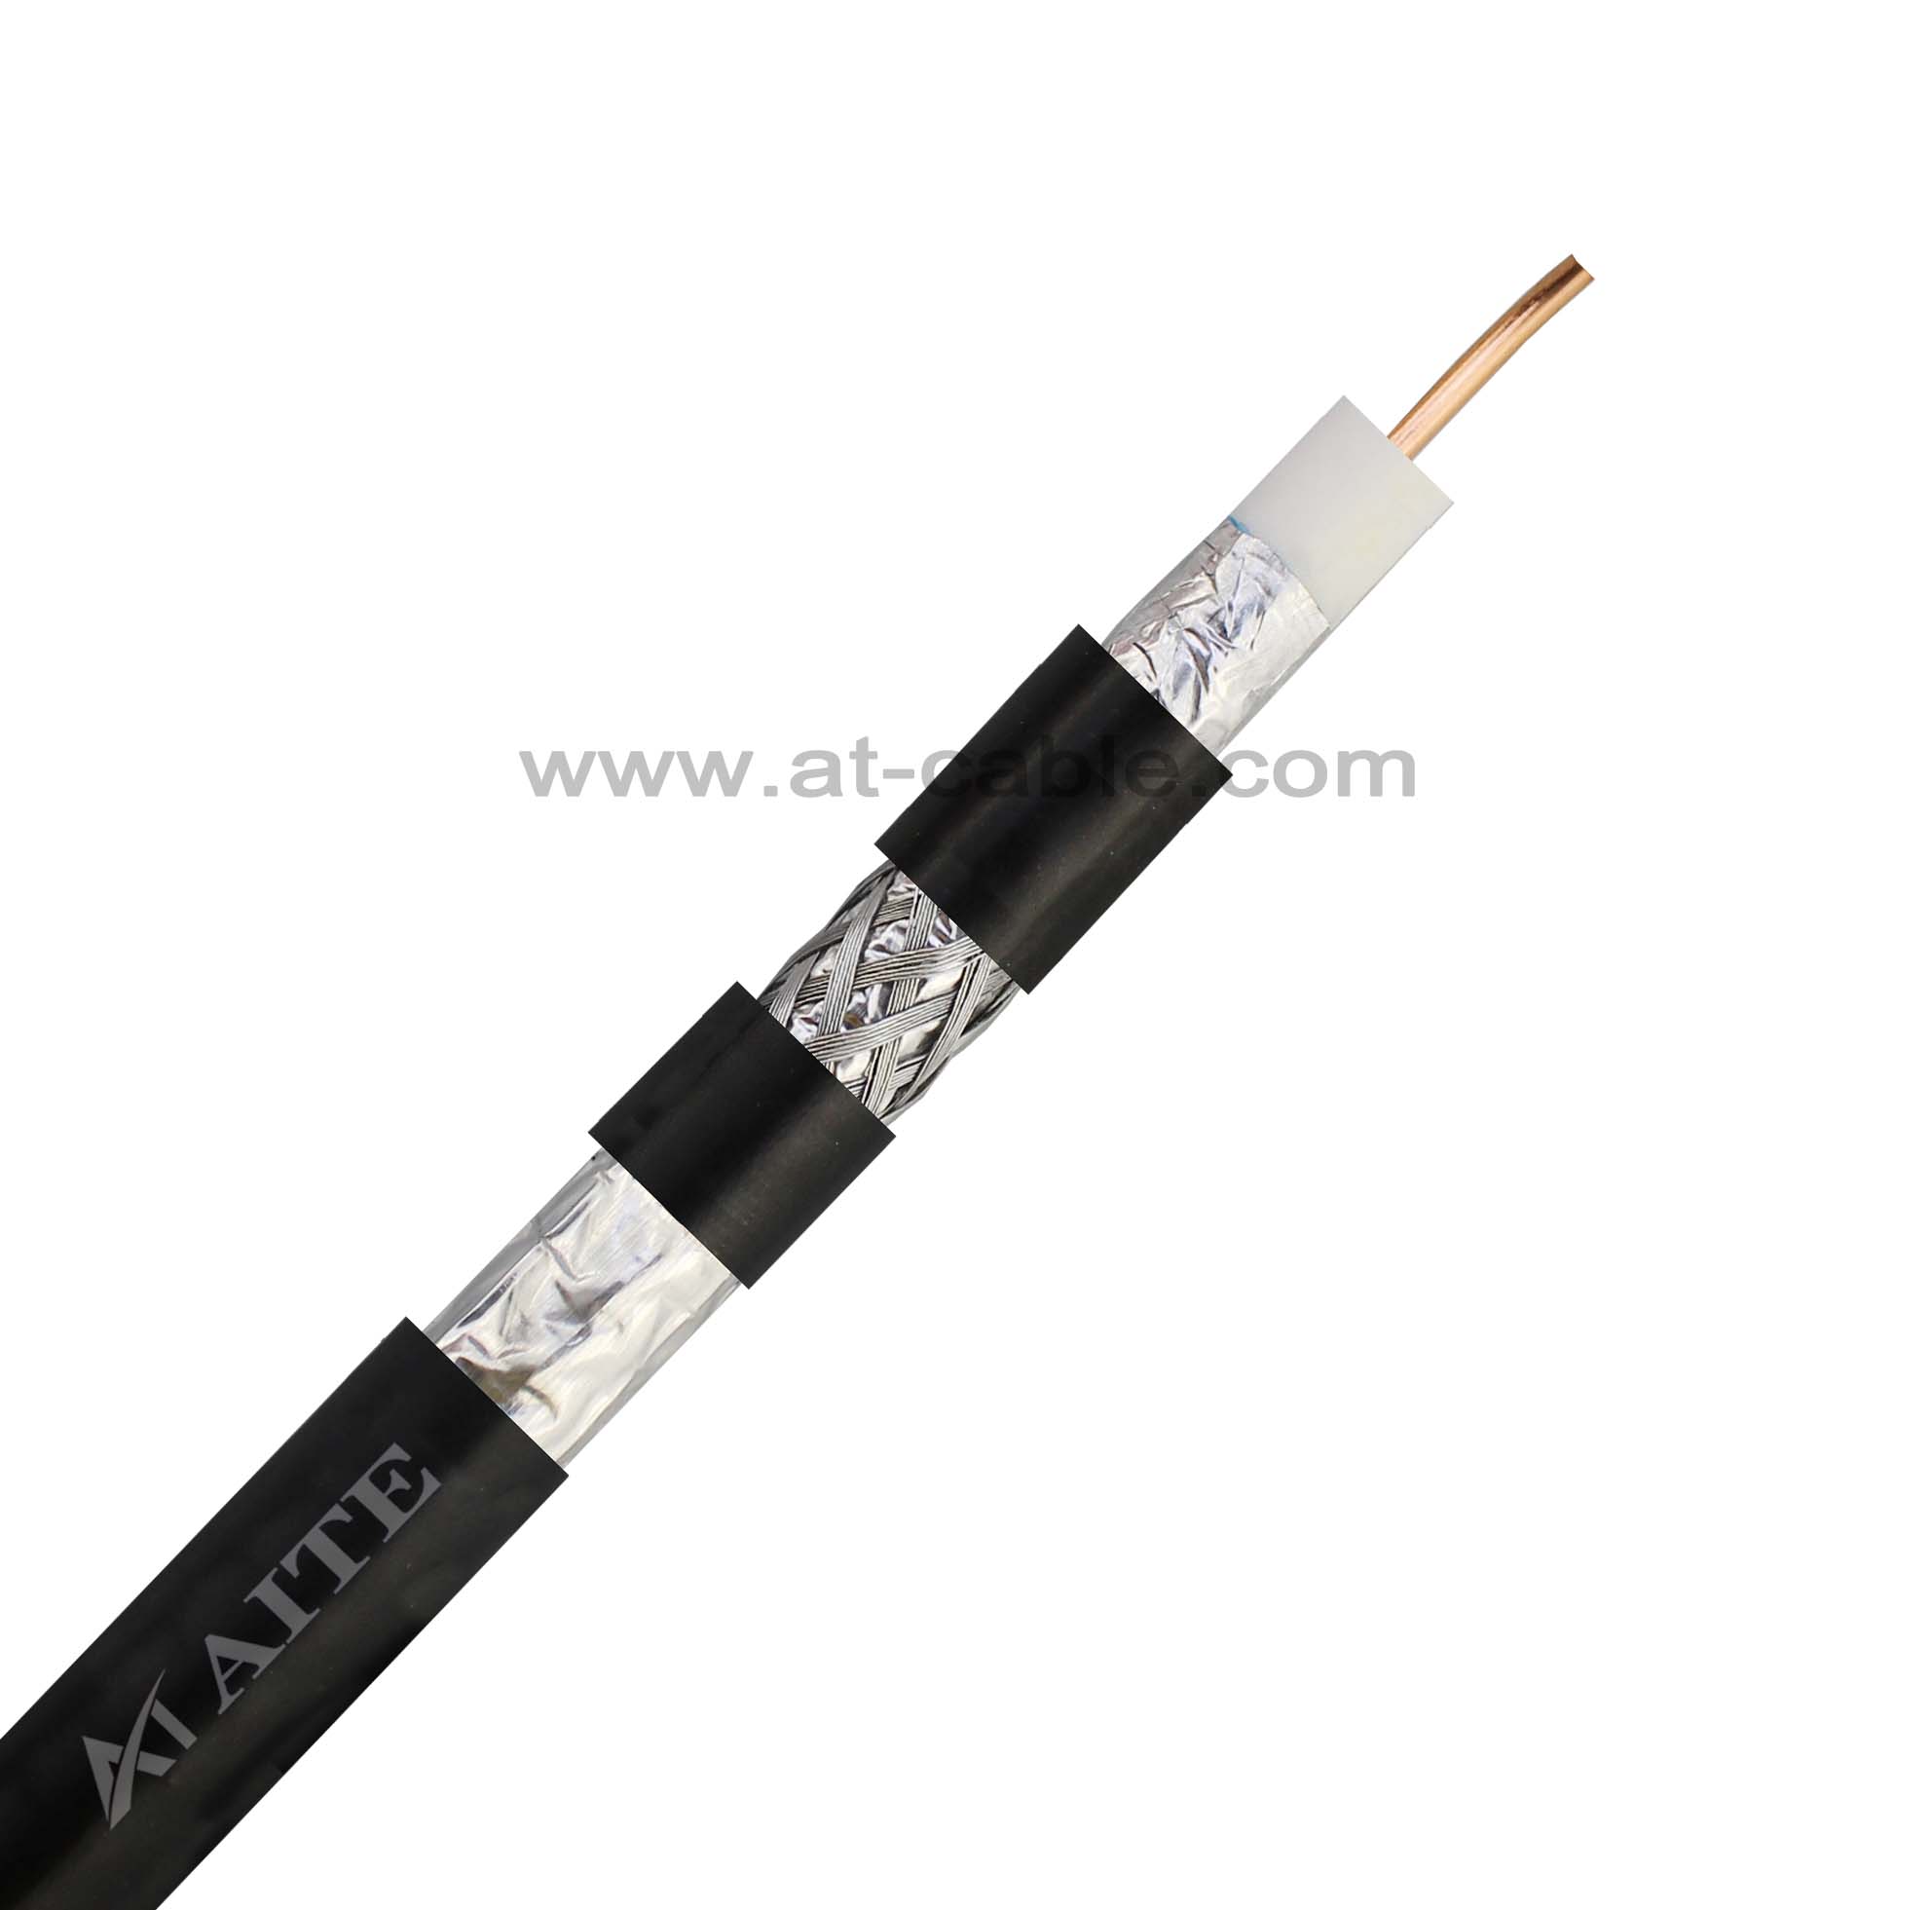 RG11 Tri-Shield Coaxial Cable